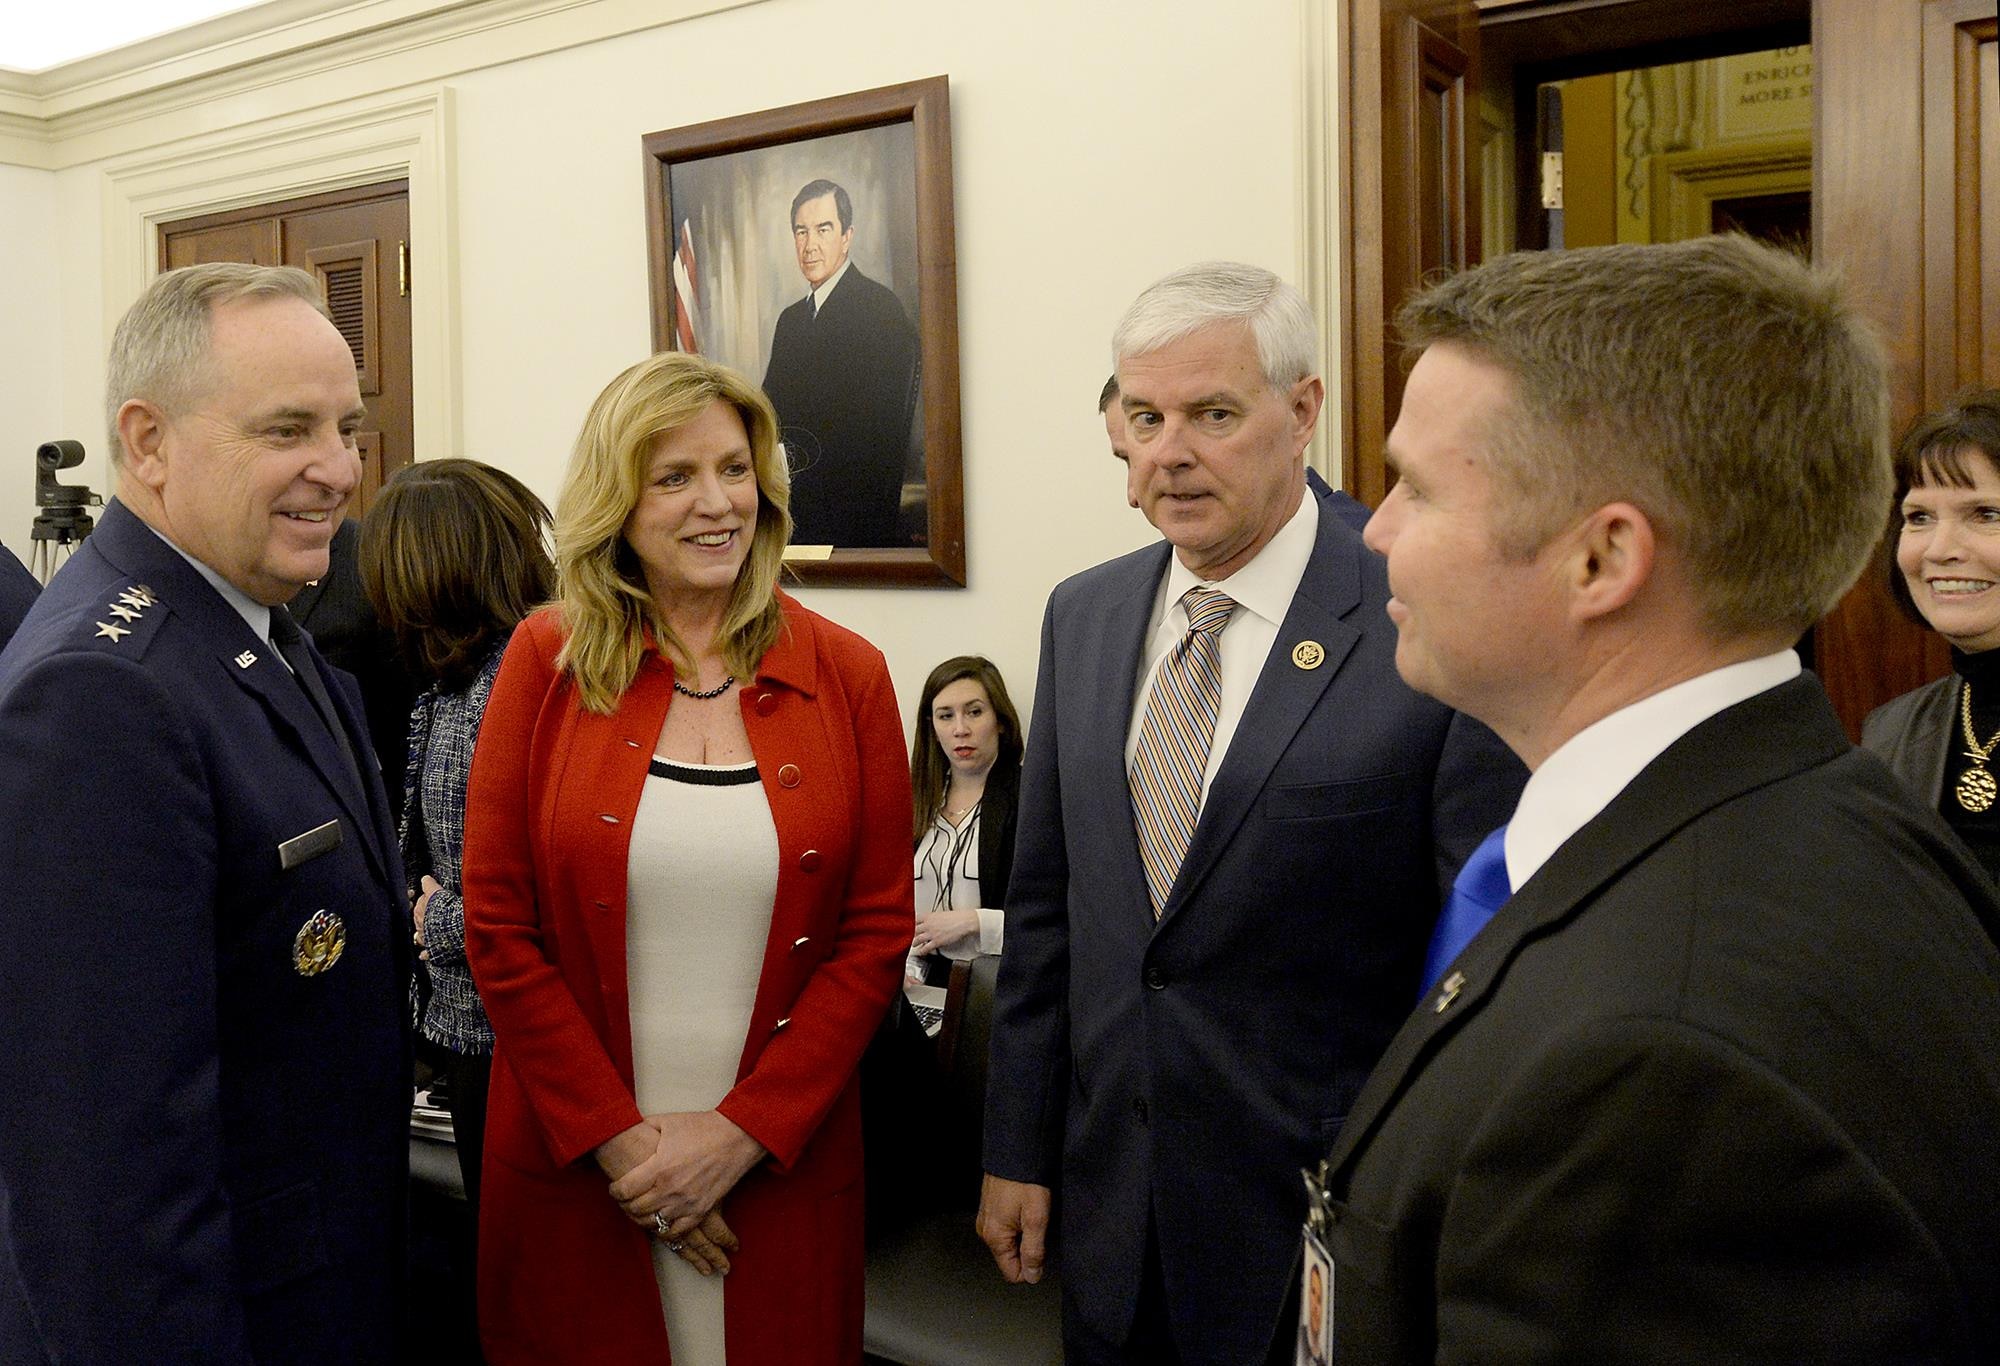 Secretary of the Air Force Deborah Lee James and Air Force Chief of Staff Gen. Mark A. Welsh III meet with Rep. Steve Womack and a Congressional staff member before testifying on current Air Force posture in front of the House Appropriations Committee on Defense in Washington, D.C., March 2, 2016. (U.S. Air Force photo/Scott M. Ash)
